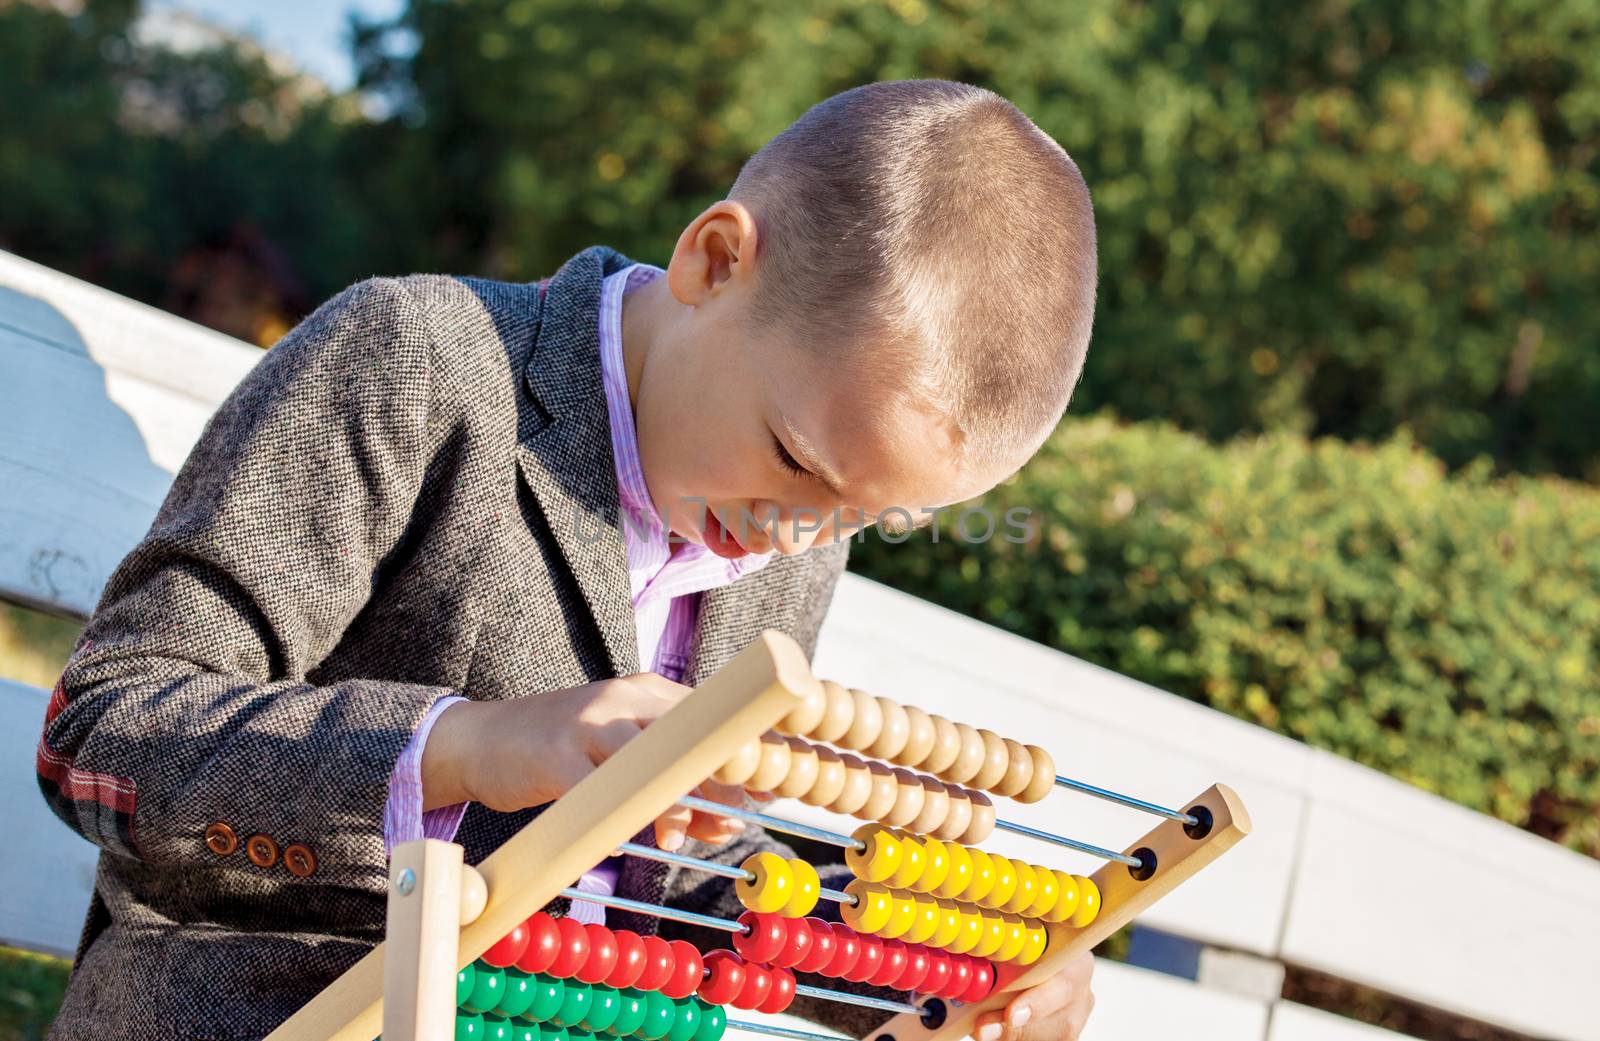 Back to school one little boy counting and playing on wooden abacus in the park.